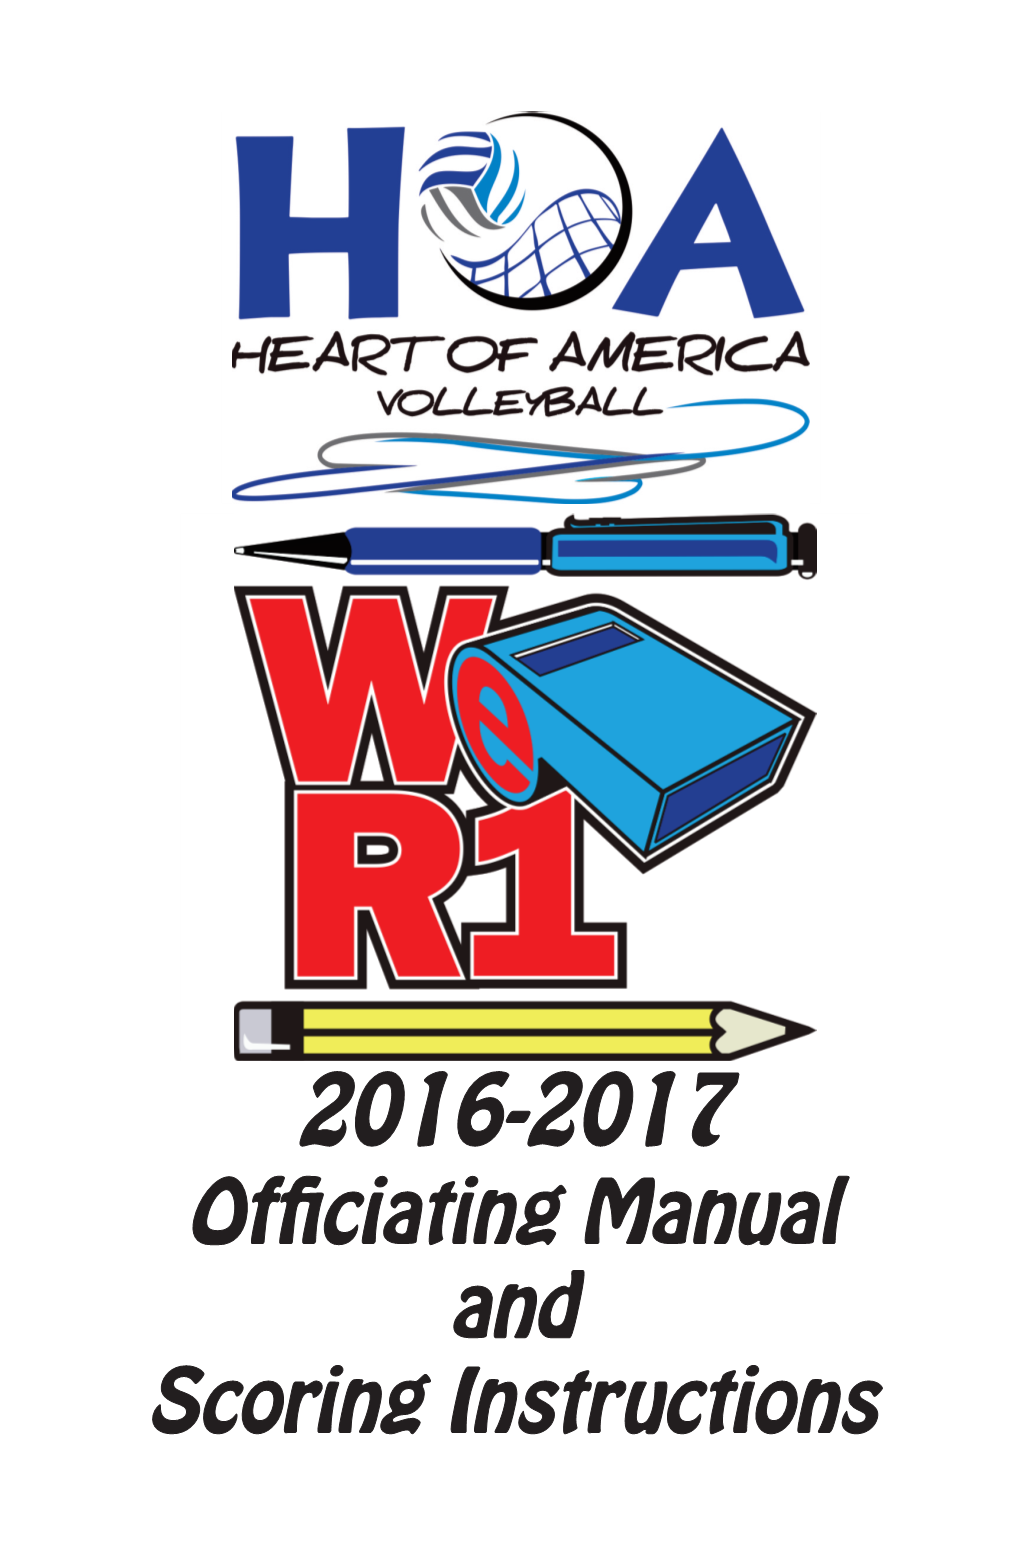 2016-2017 Officiating Manual and Scoring Instructions 2016-2017 OFFICIATING MANUAL and SCORING INSTRUCTIONS TABLE of CONTENTS